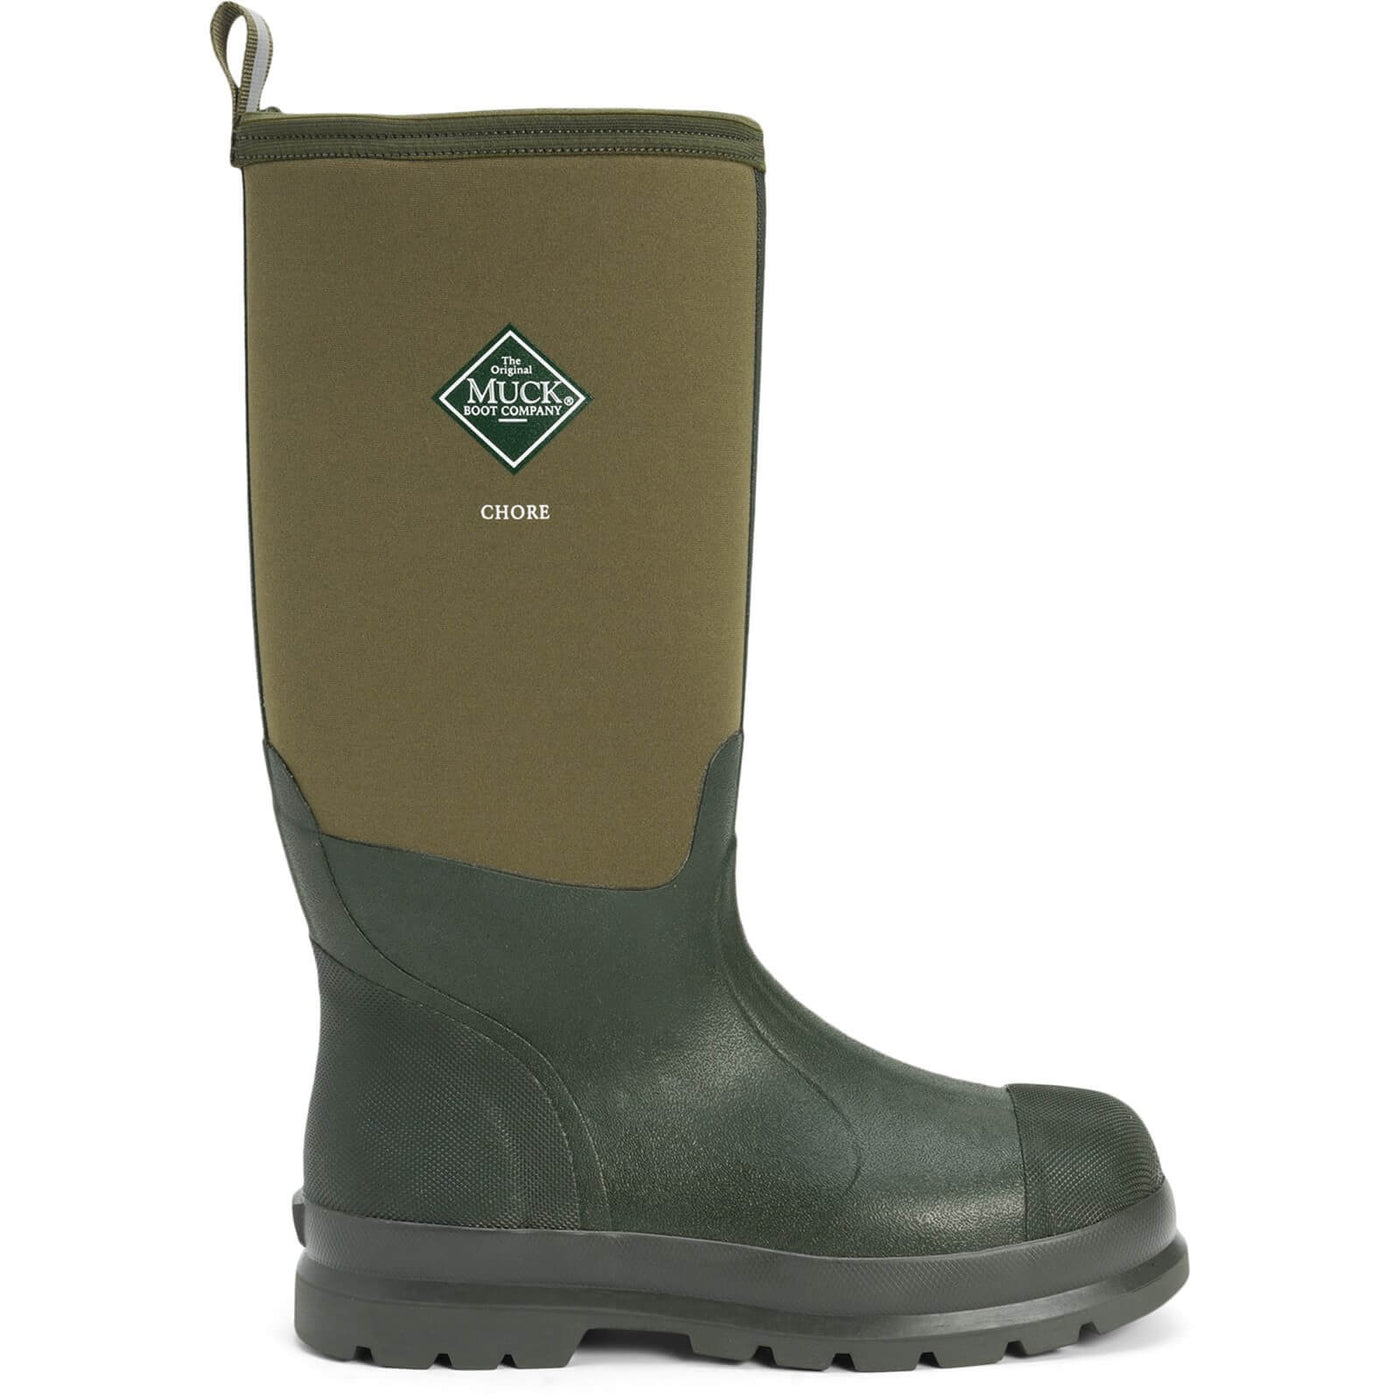 Muck Boots Chore Classic Hi Patterned Wellies Moss 6#colour_moss-army-green